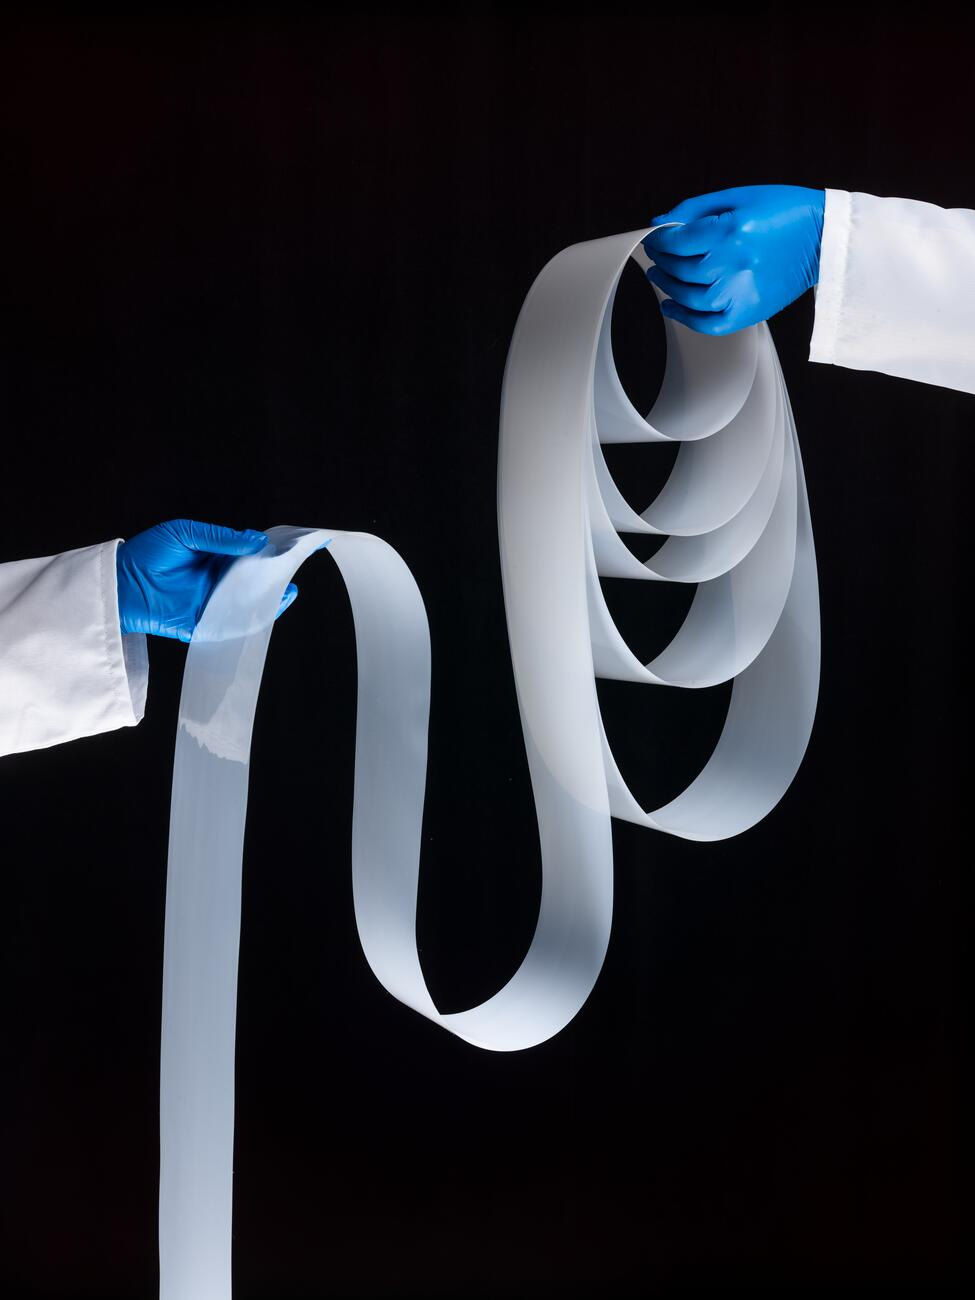 Picture of white ribbon held by two hands in blue gloves on black background